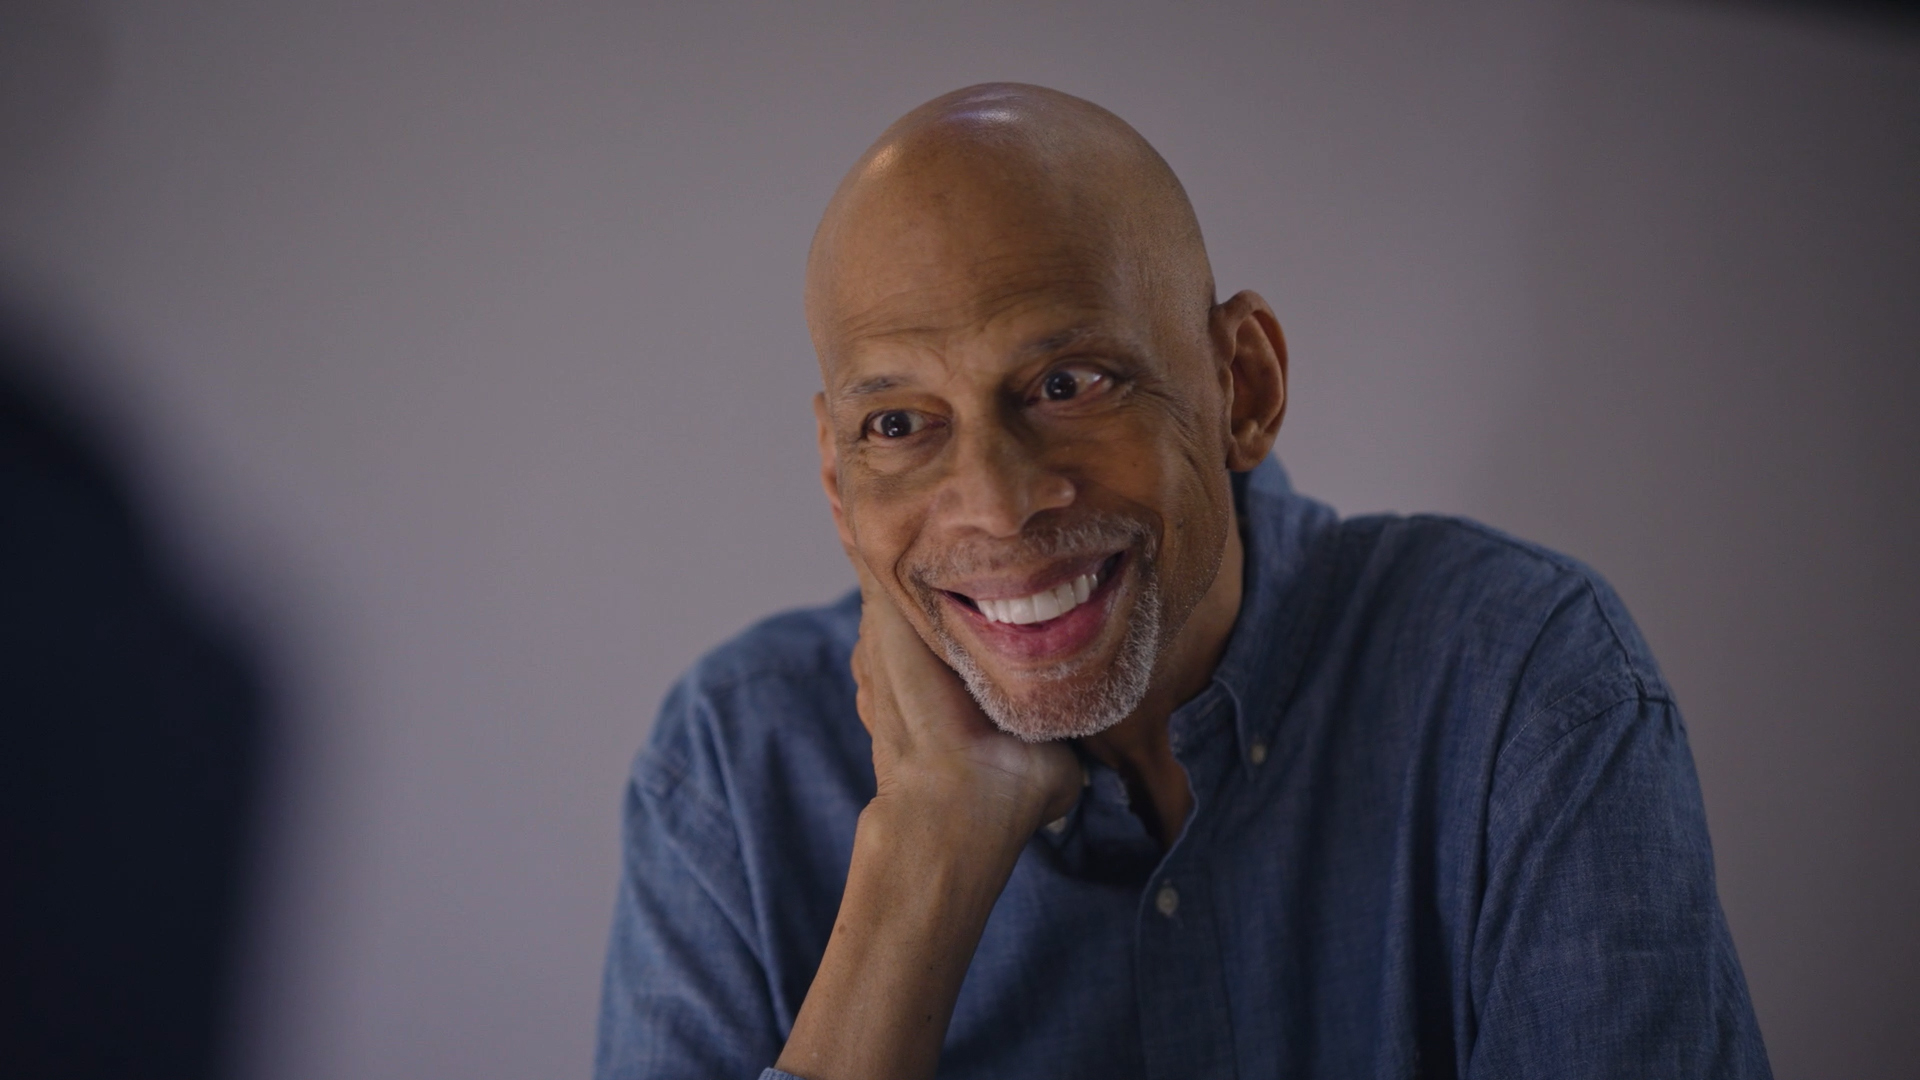 Kareem Abdul-Jabbar is teaming up with Bristol Myers Squibb and Pfizer to raise awareness of atrial fibrillation and its symptoms as part of the No Time to Wait campaign. (Bristol Myers Squibb-Pfizer Alliance)